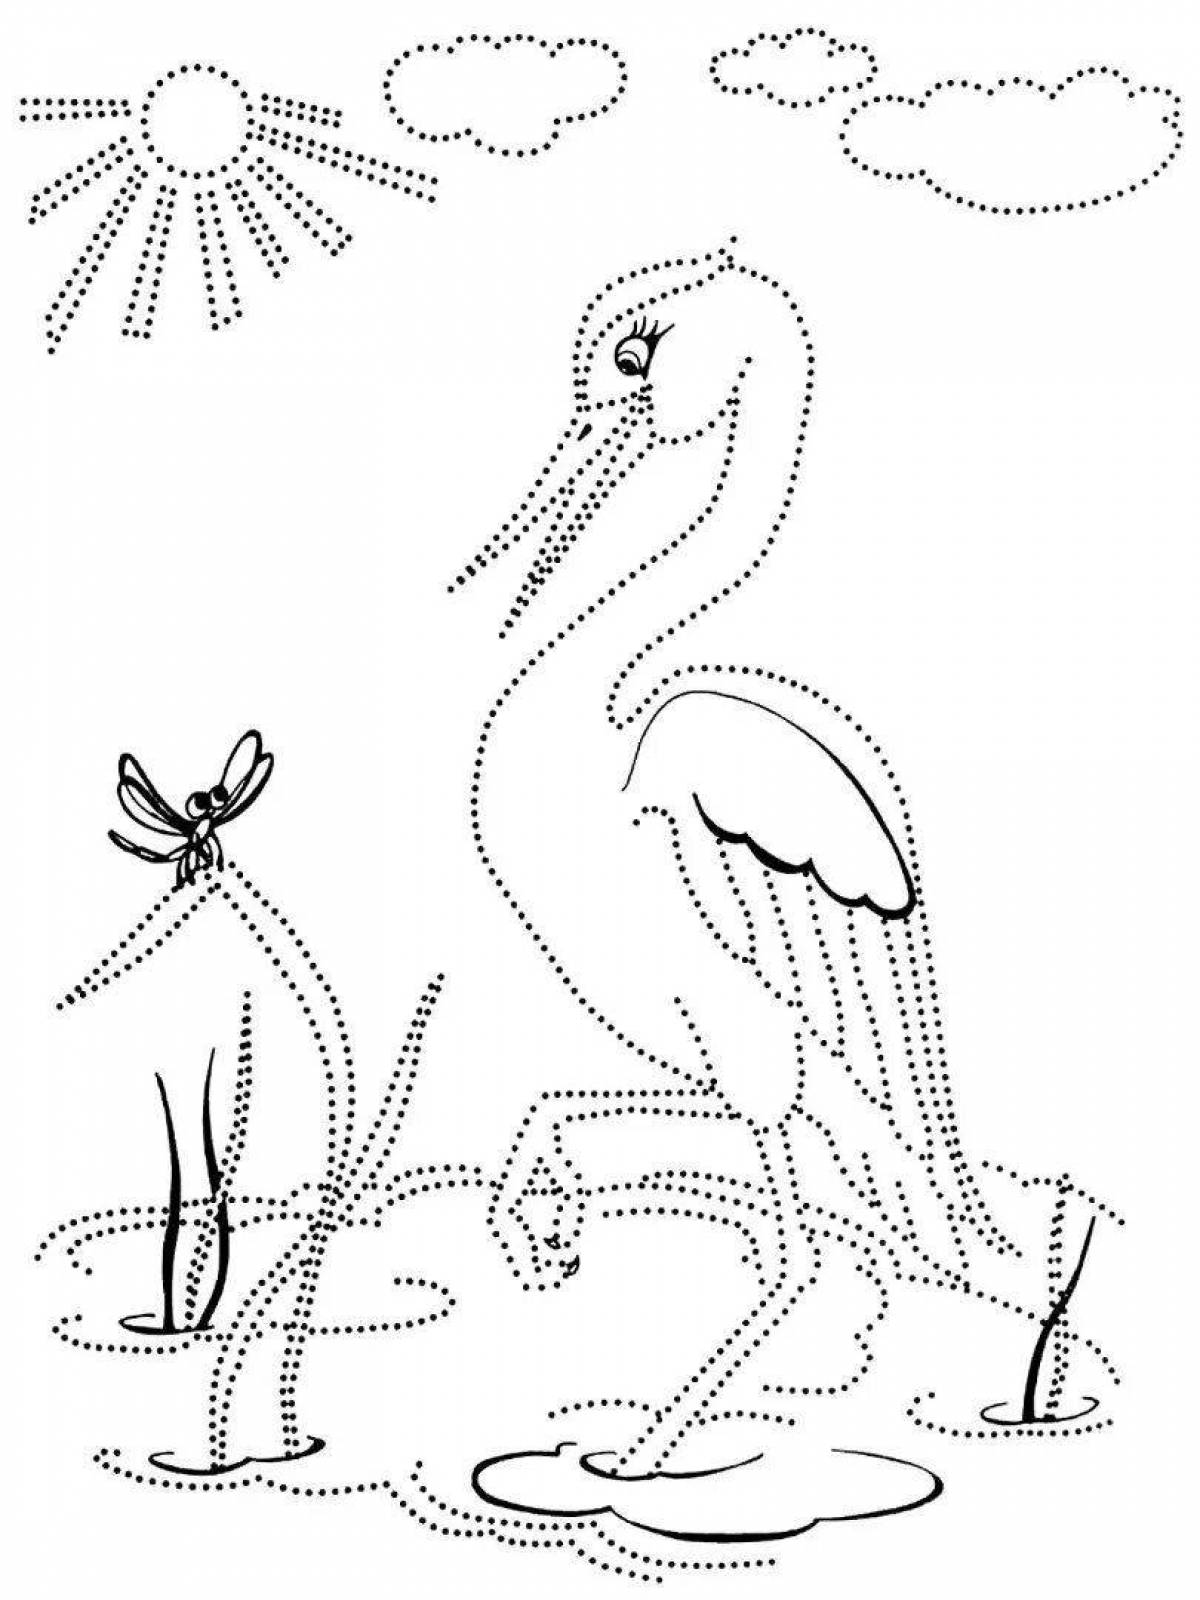 Fancy heron coloring pages for kids